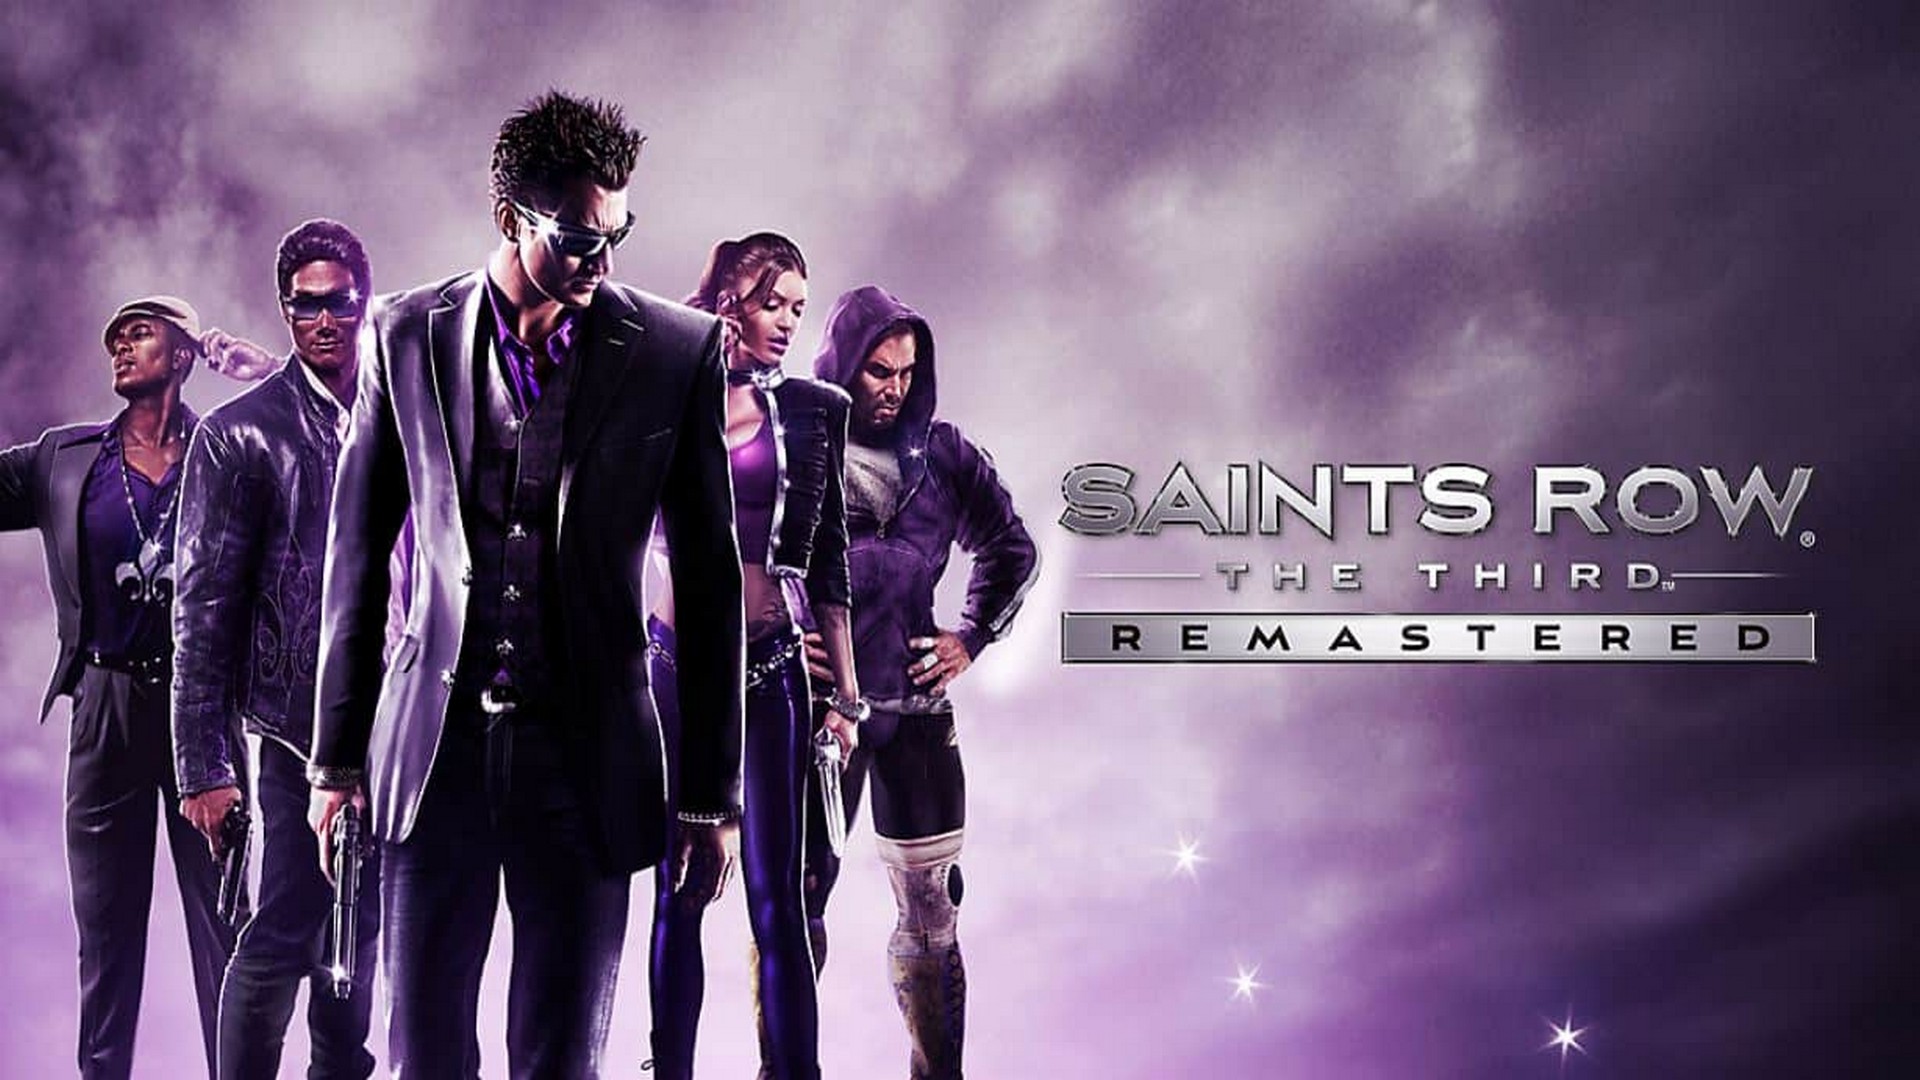 Saints Row: The Third Remastered Launching On Xbox Series X|S & Playstation 5 As Free Upgrade